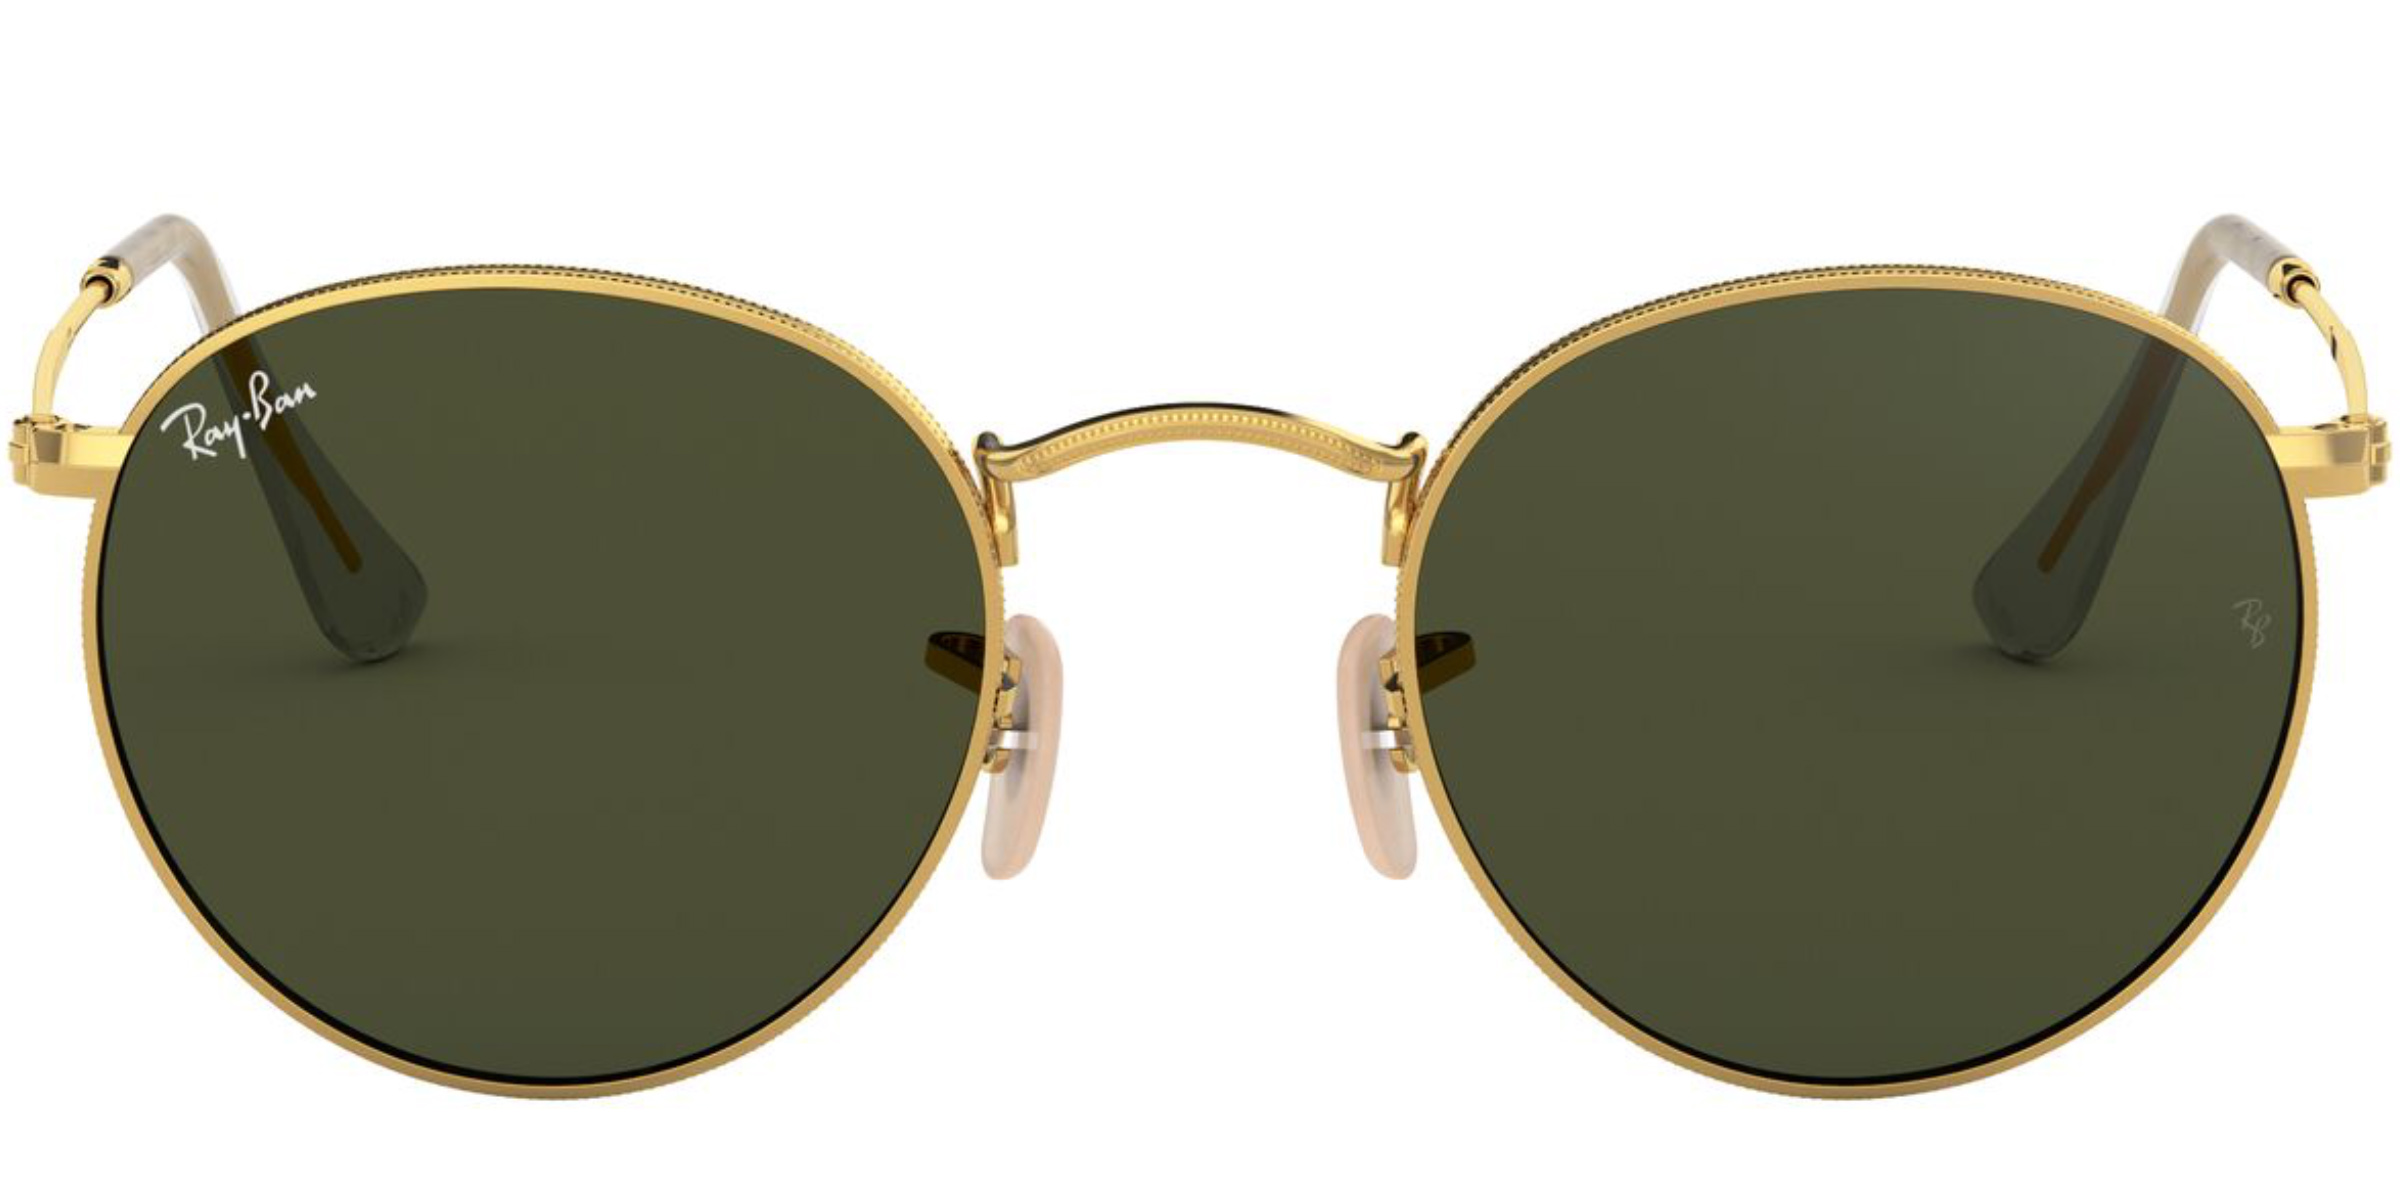 Ray-Ban RB3447 sunglasses for men or women in Arista